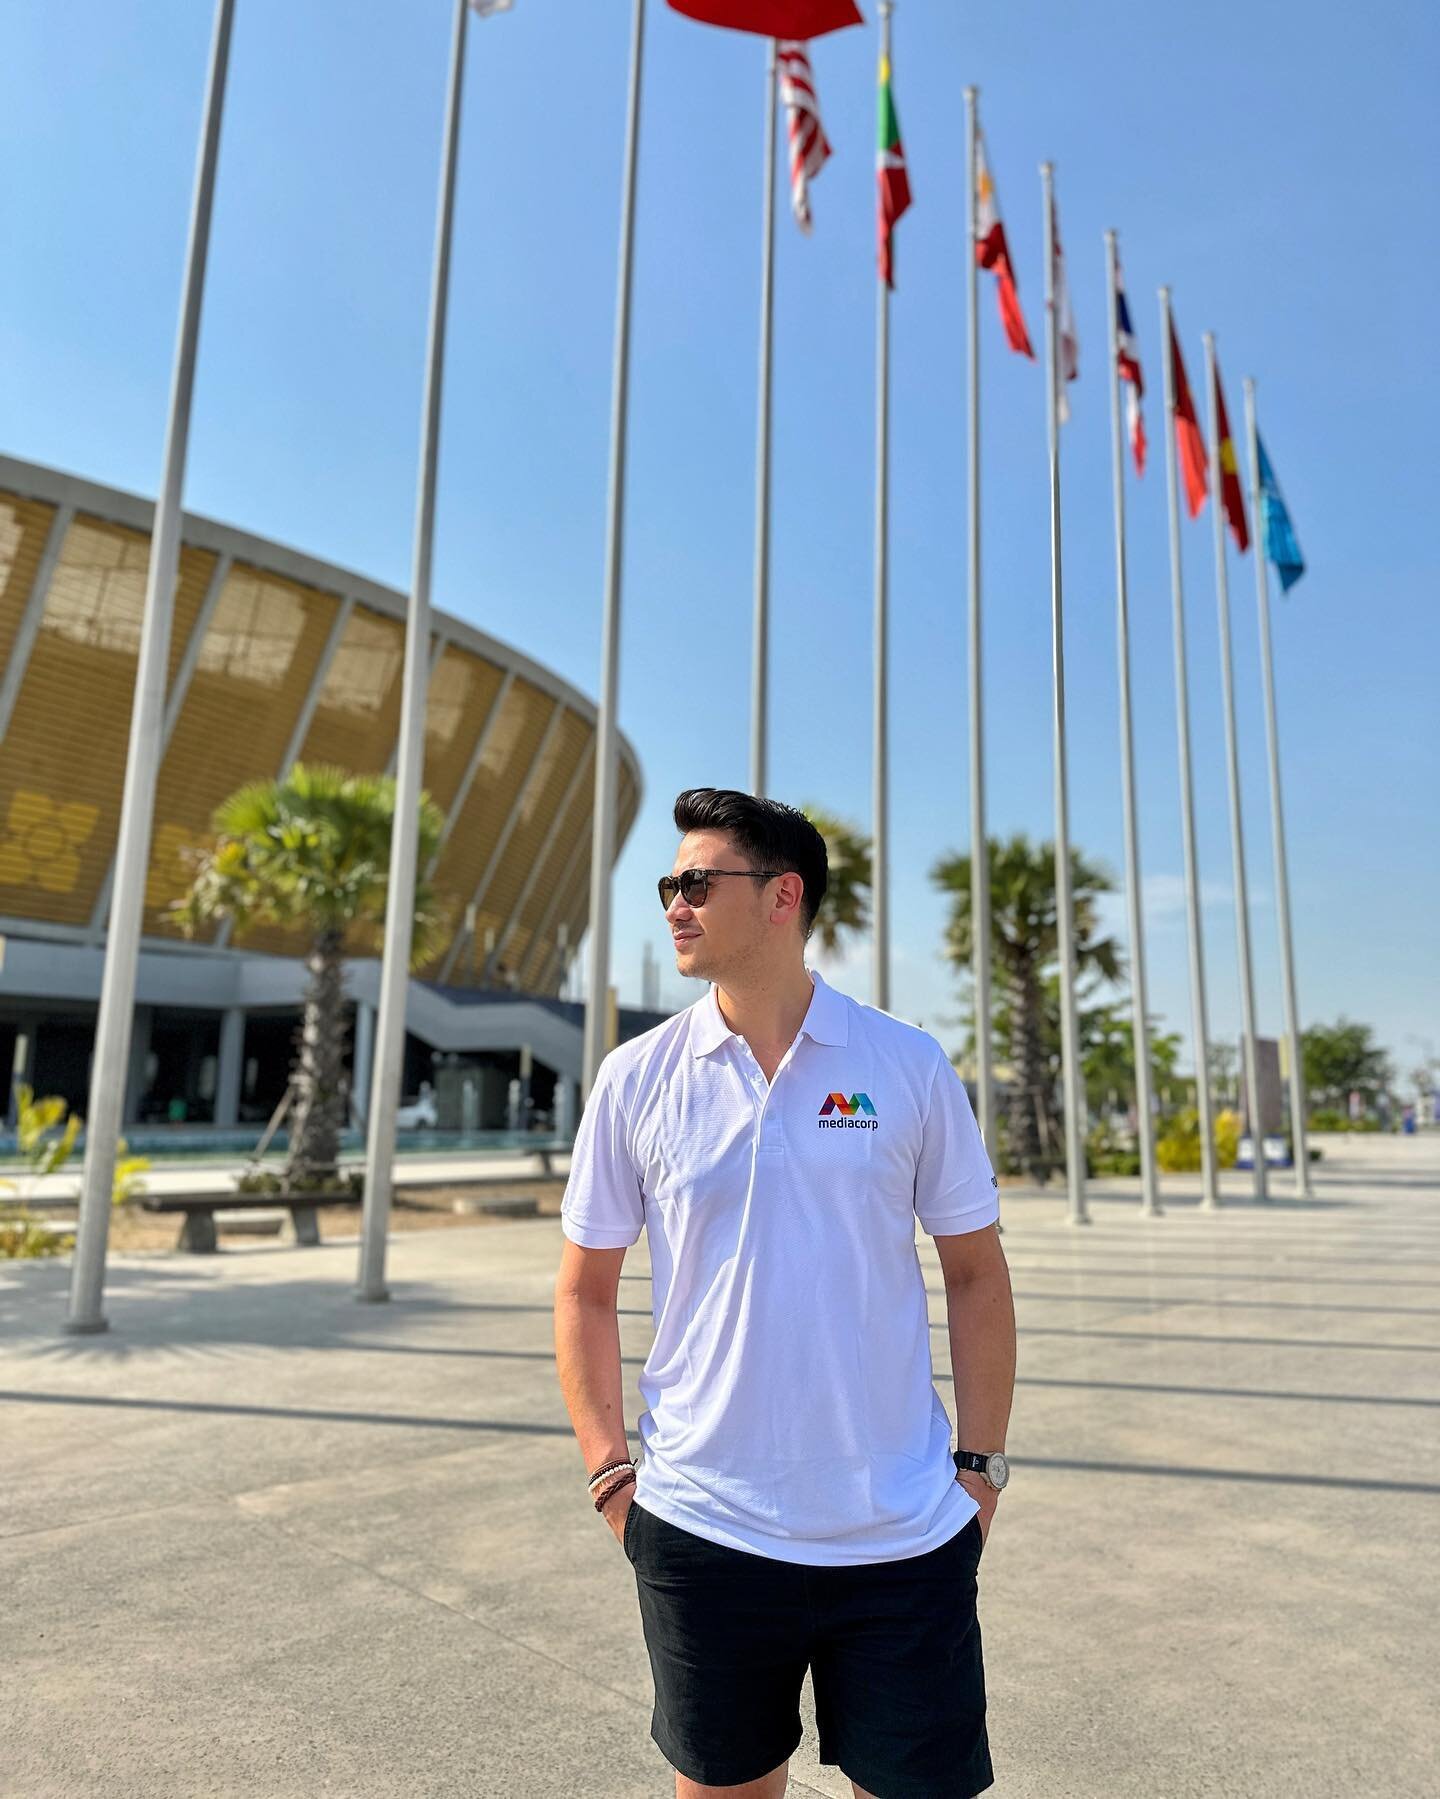 Hello from Cambodia! 🇰🇭
Here hosting #SEAGames2023 for @mediacorp and so far it&rsquo;s been crazy hot and a crazy amount of fun! 🥵🙌🏻
Catch our live coverage every day on Channel 5 and @mewatch.mediacorp! 

#32ndSEAGames #mediacorp32ndSEAGames #